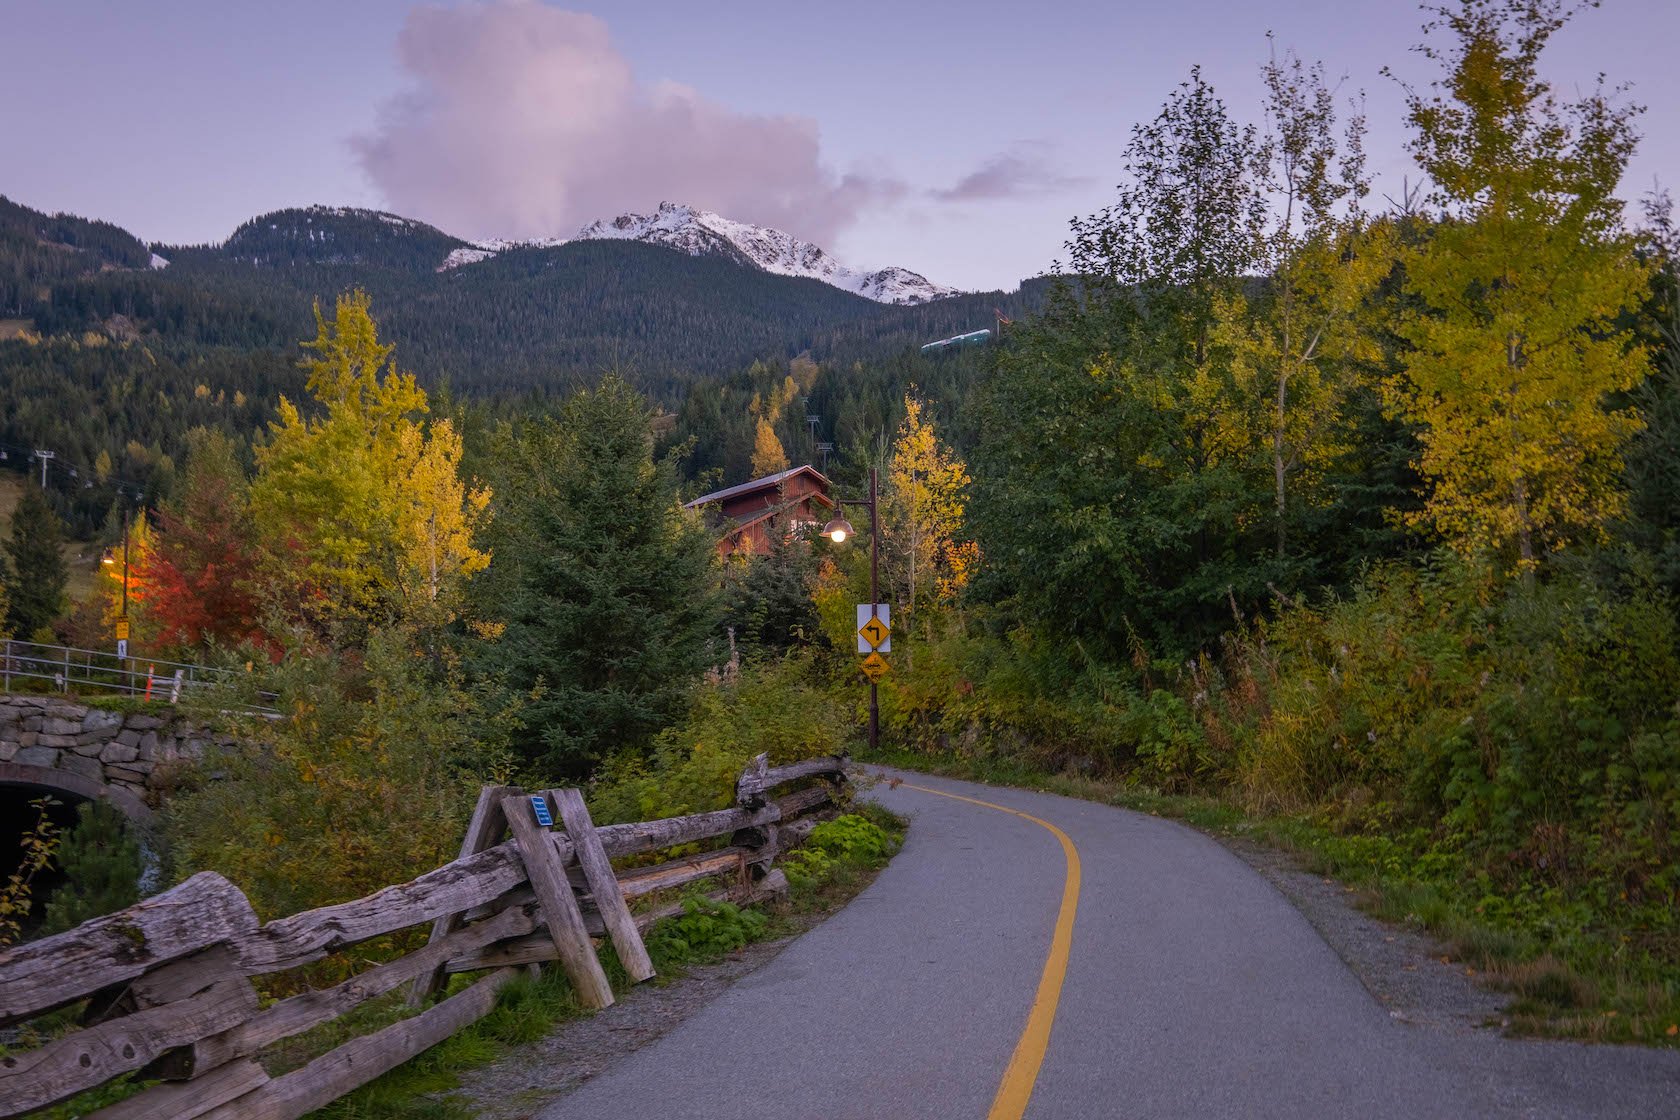 The Best Things to do in Whistler